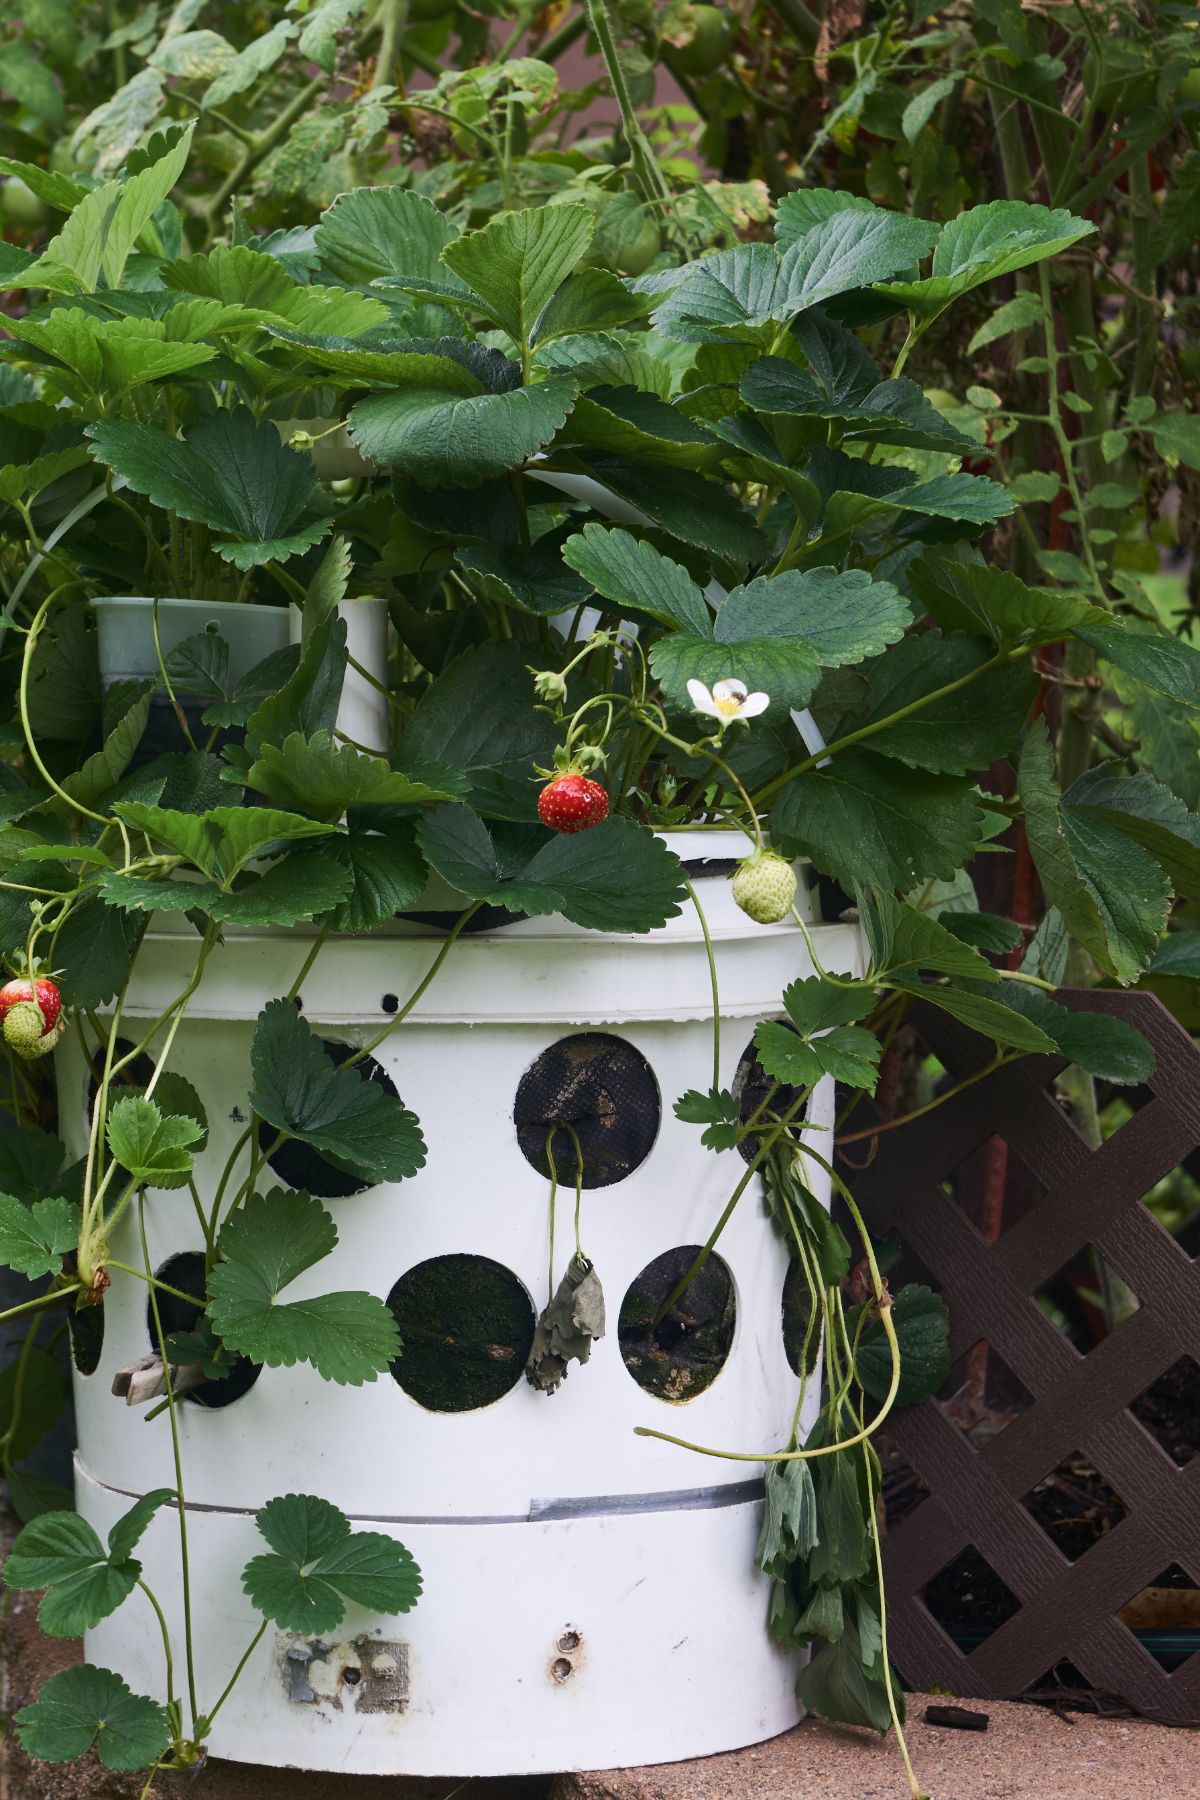 A five-gallon bucket tuned into a topsy-turvy style strawberry tower